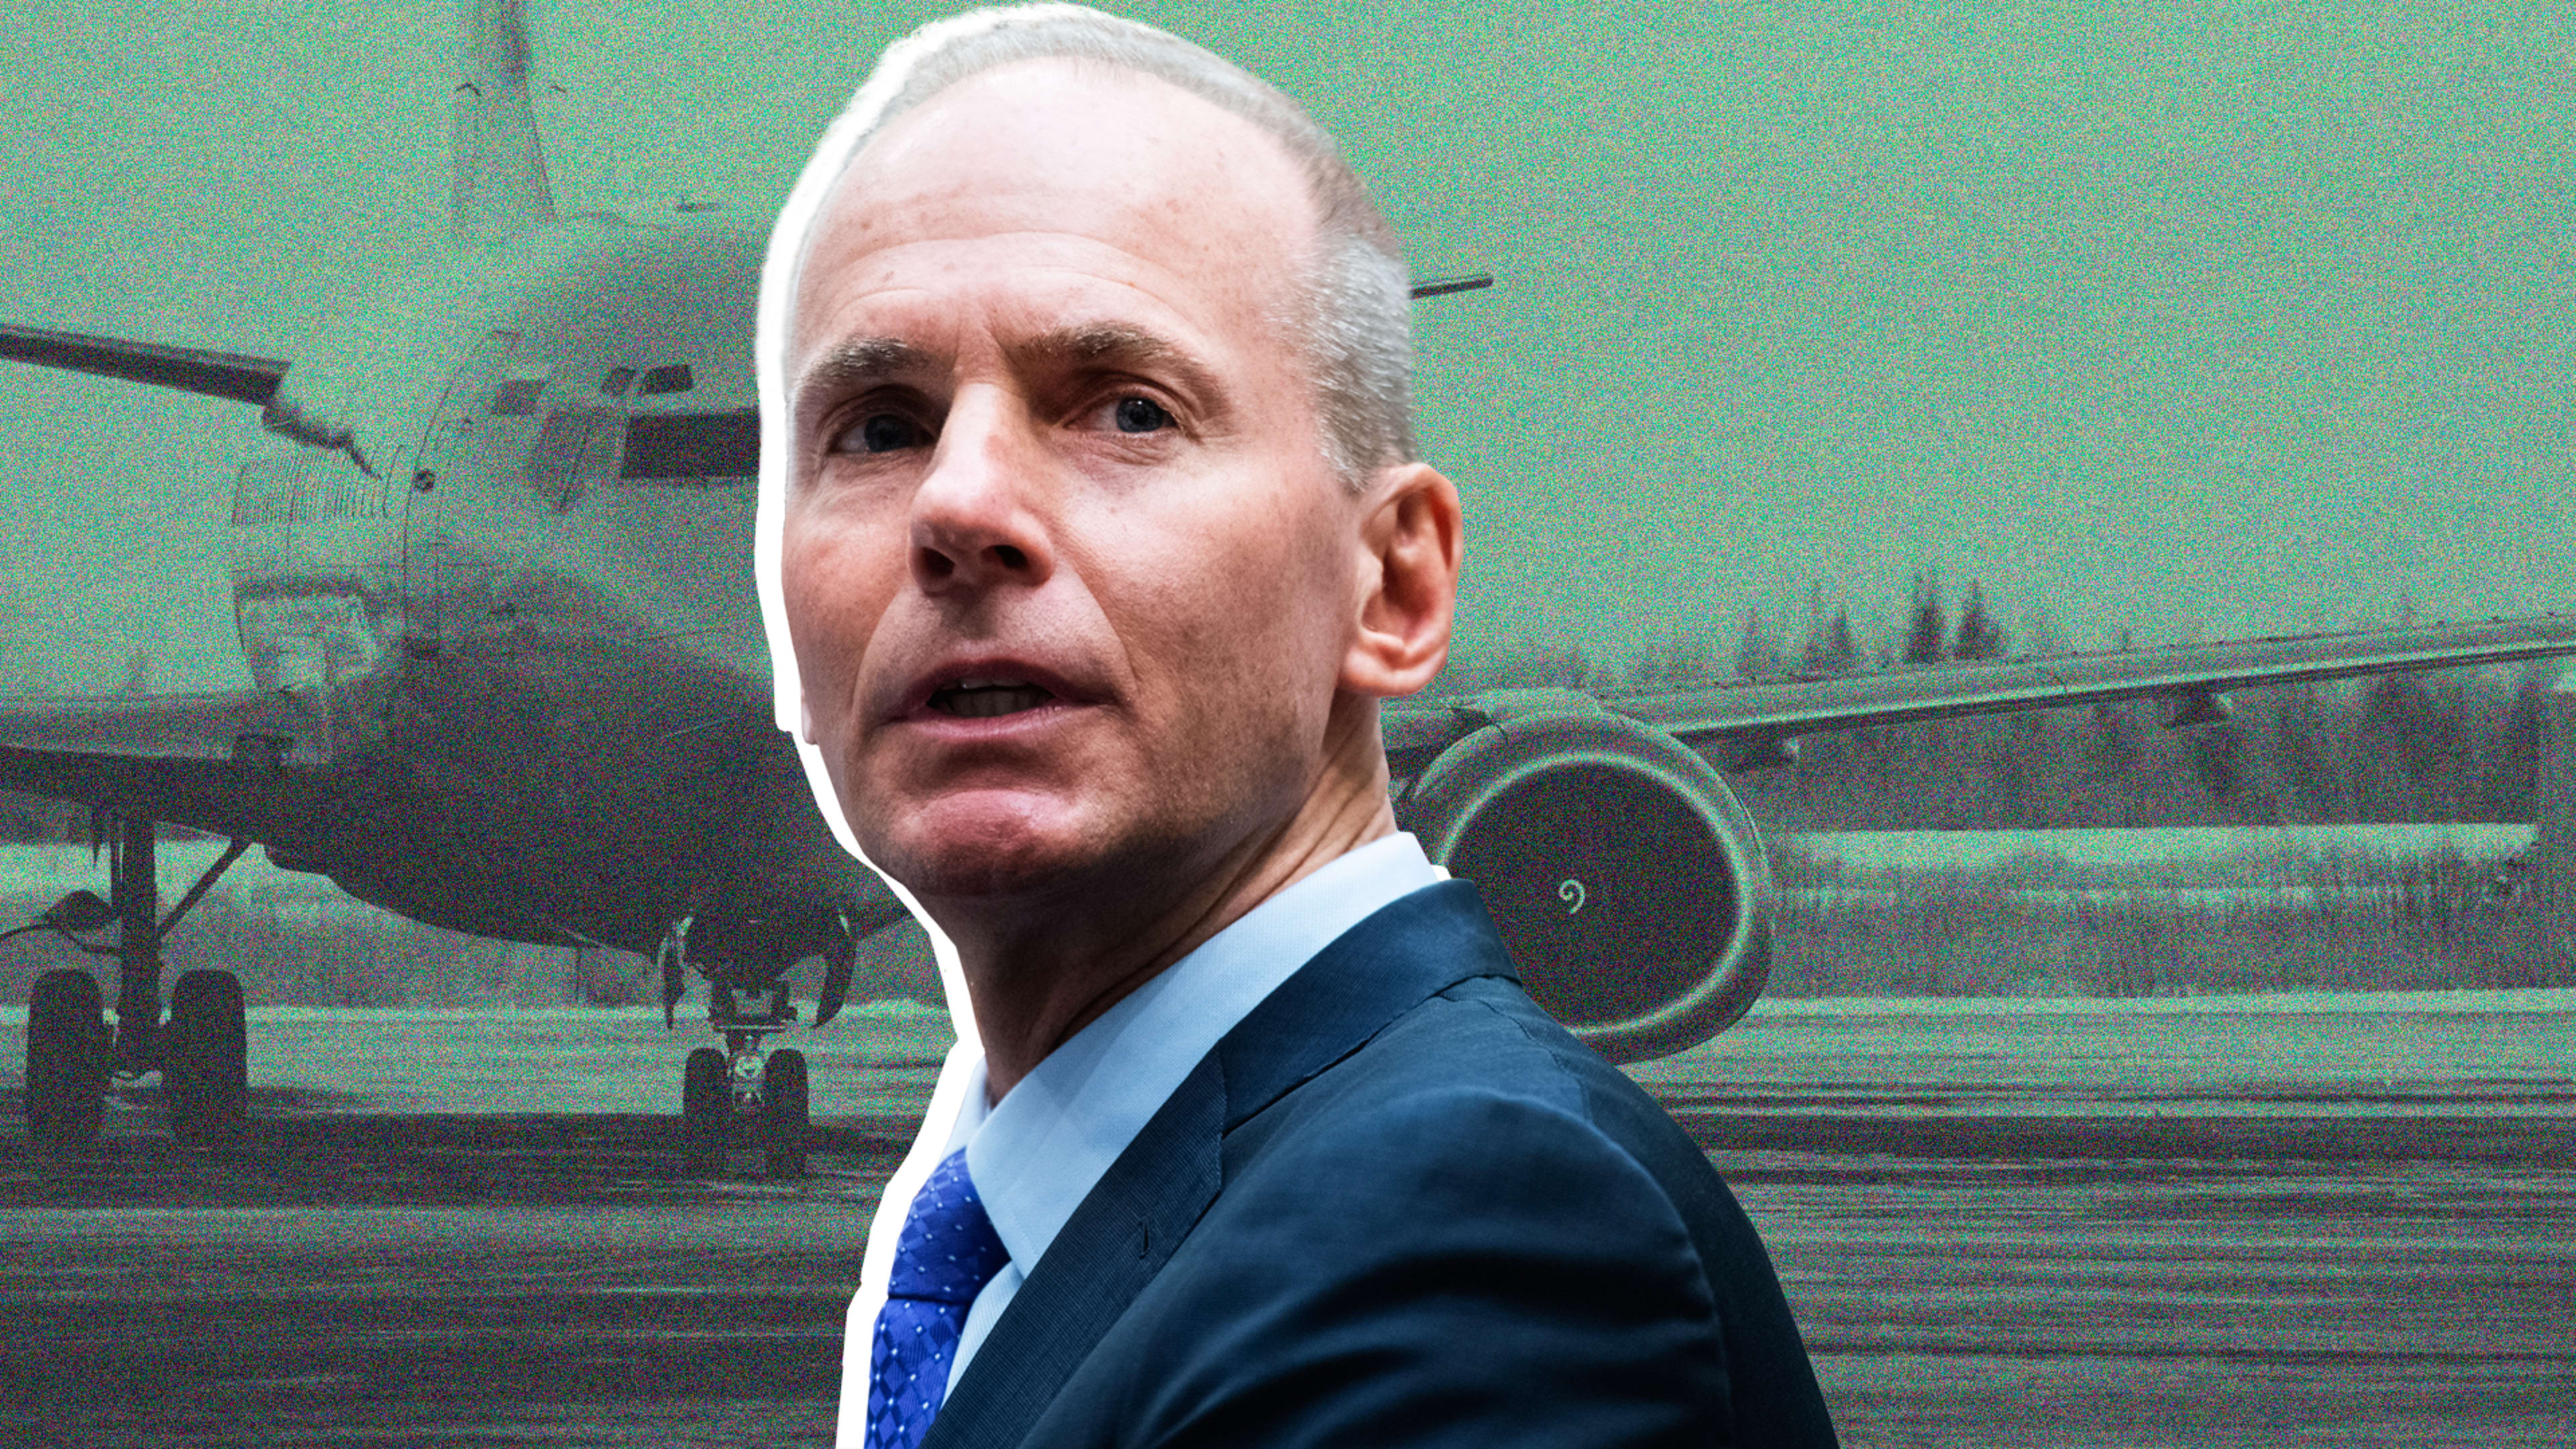 Boeing’s deadly and fiscally disastrous year ends with an ousted CEO